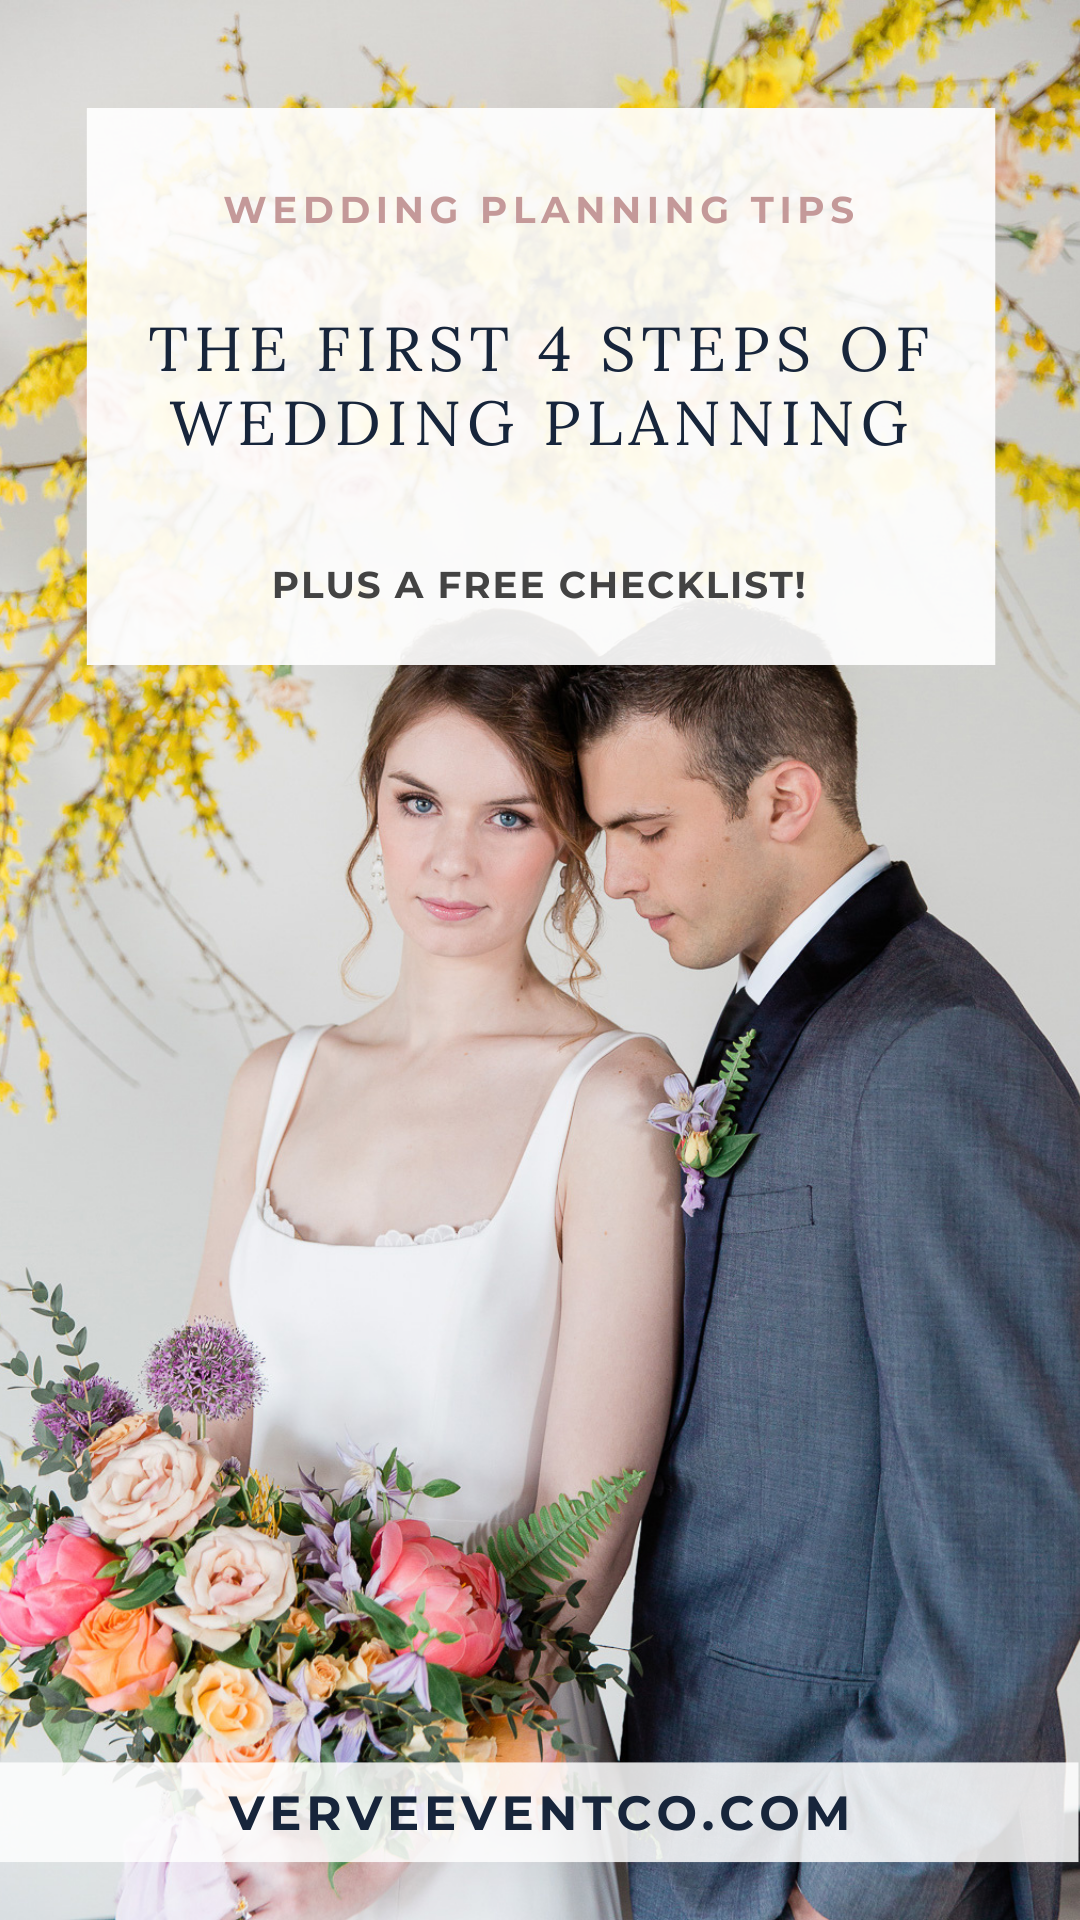 You're Engaged! Now What? | The First 4 Steps of Wedding Planning